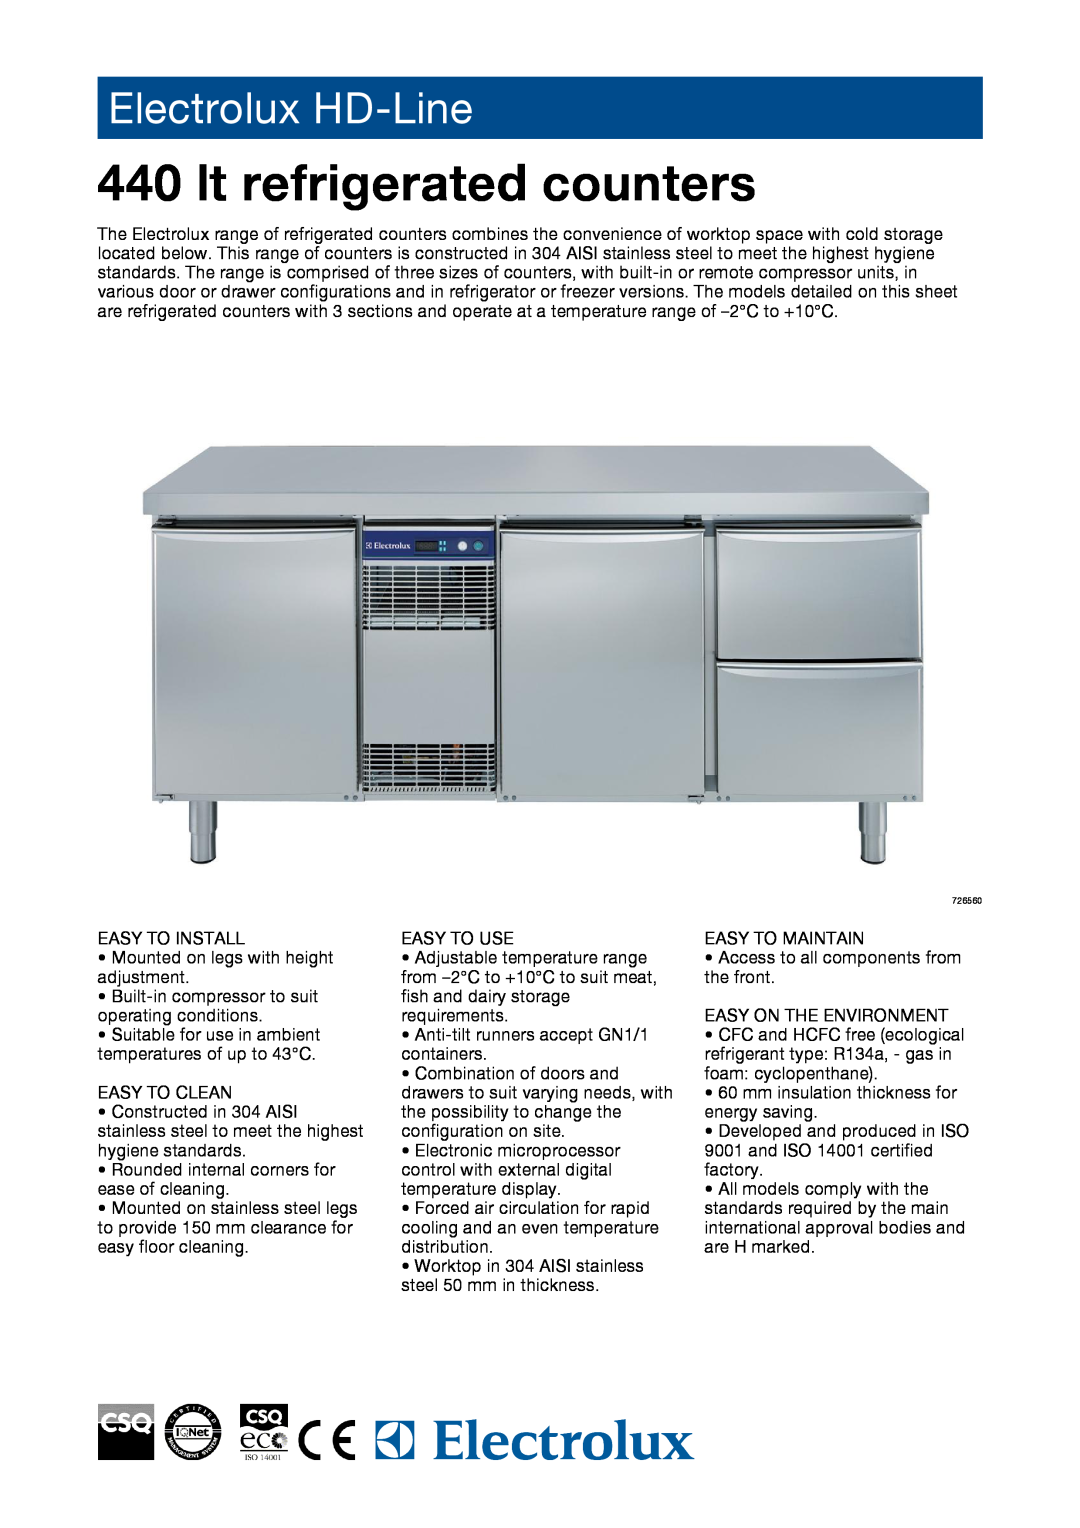 Electrolux 726560, 726561, 726562, 727077, 727080, 727078, 726559, RCDR3M23T manual lt refrigerated counters, Electrolux HD-Line 